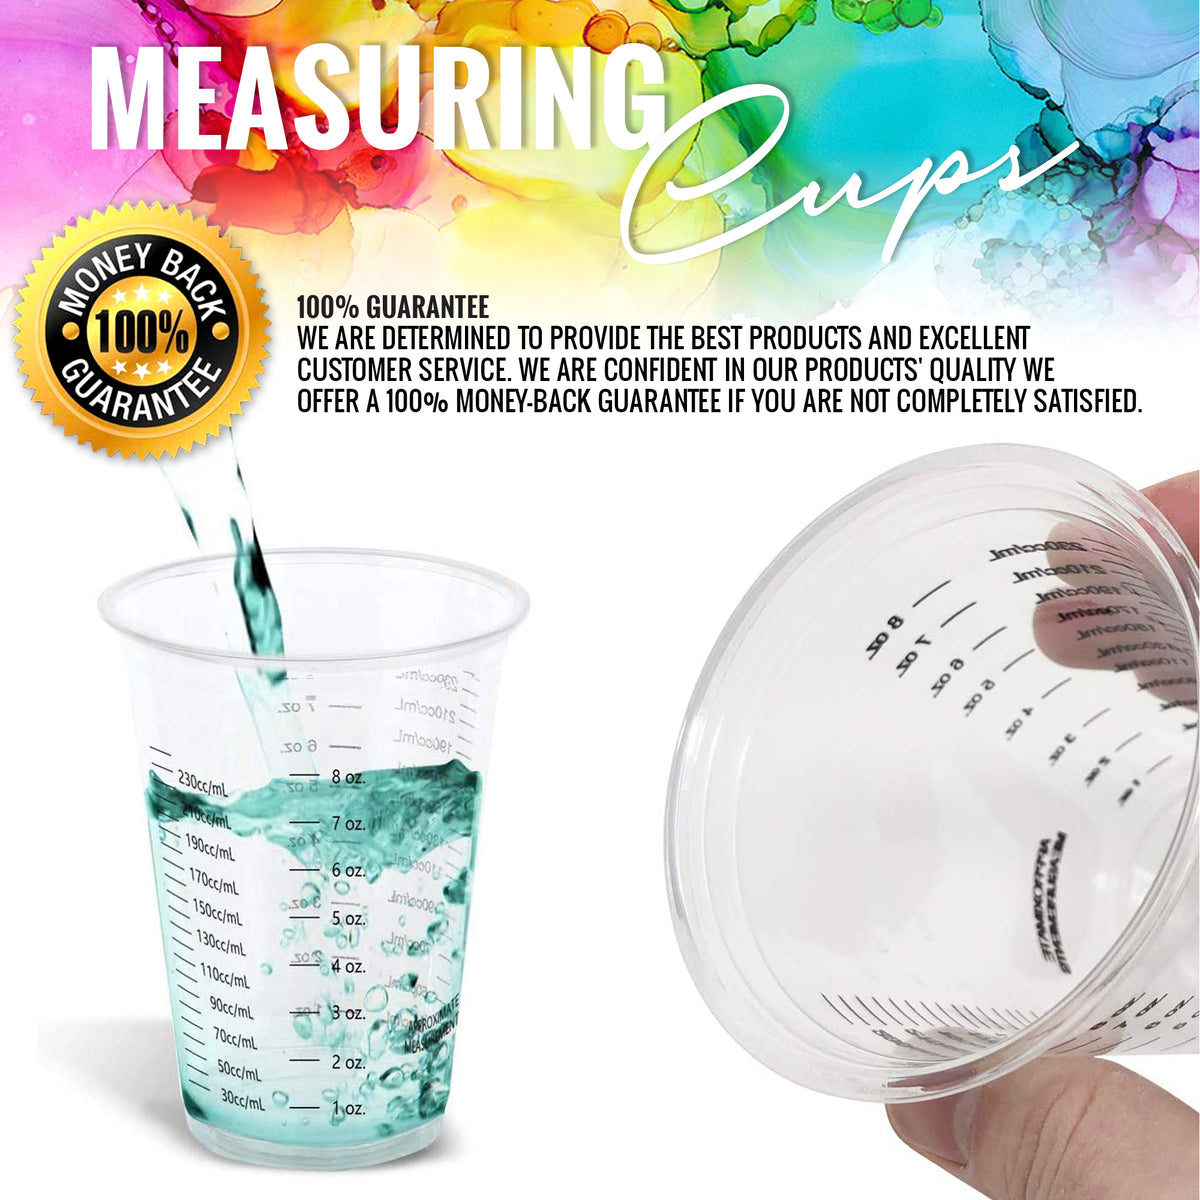 PIXISS Disposable Mixing Measuring Cups - 10oz.